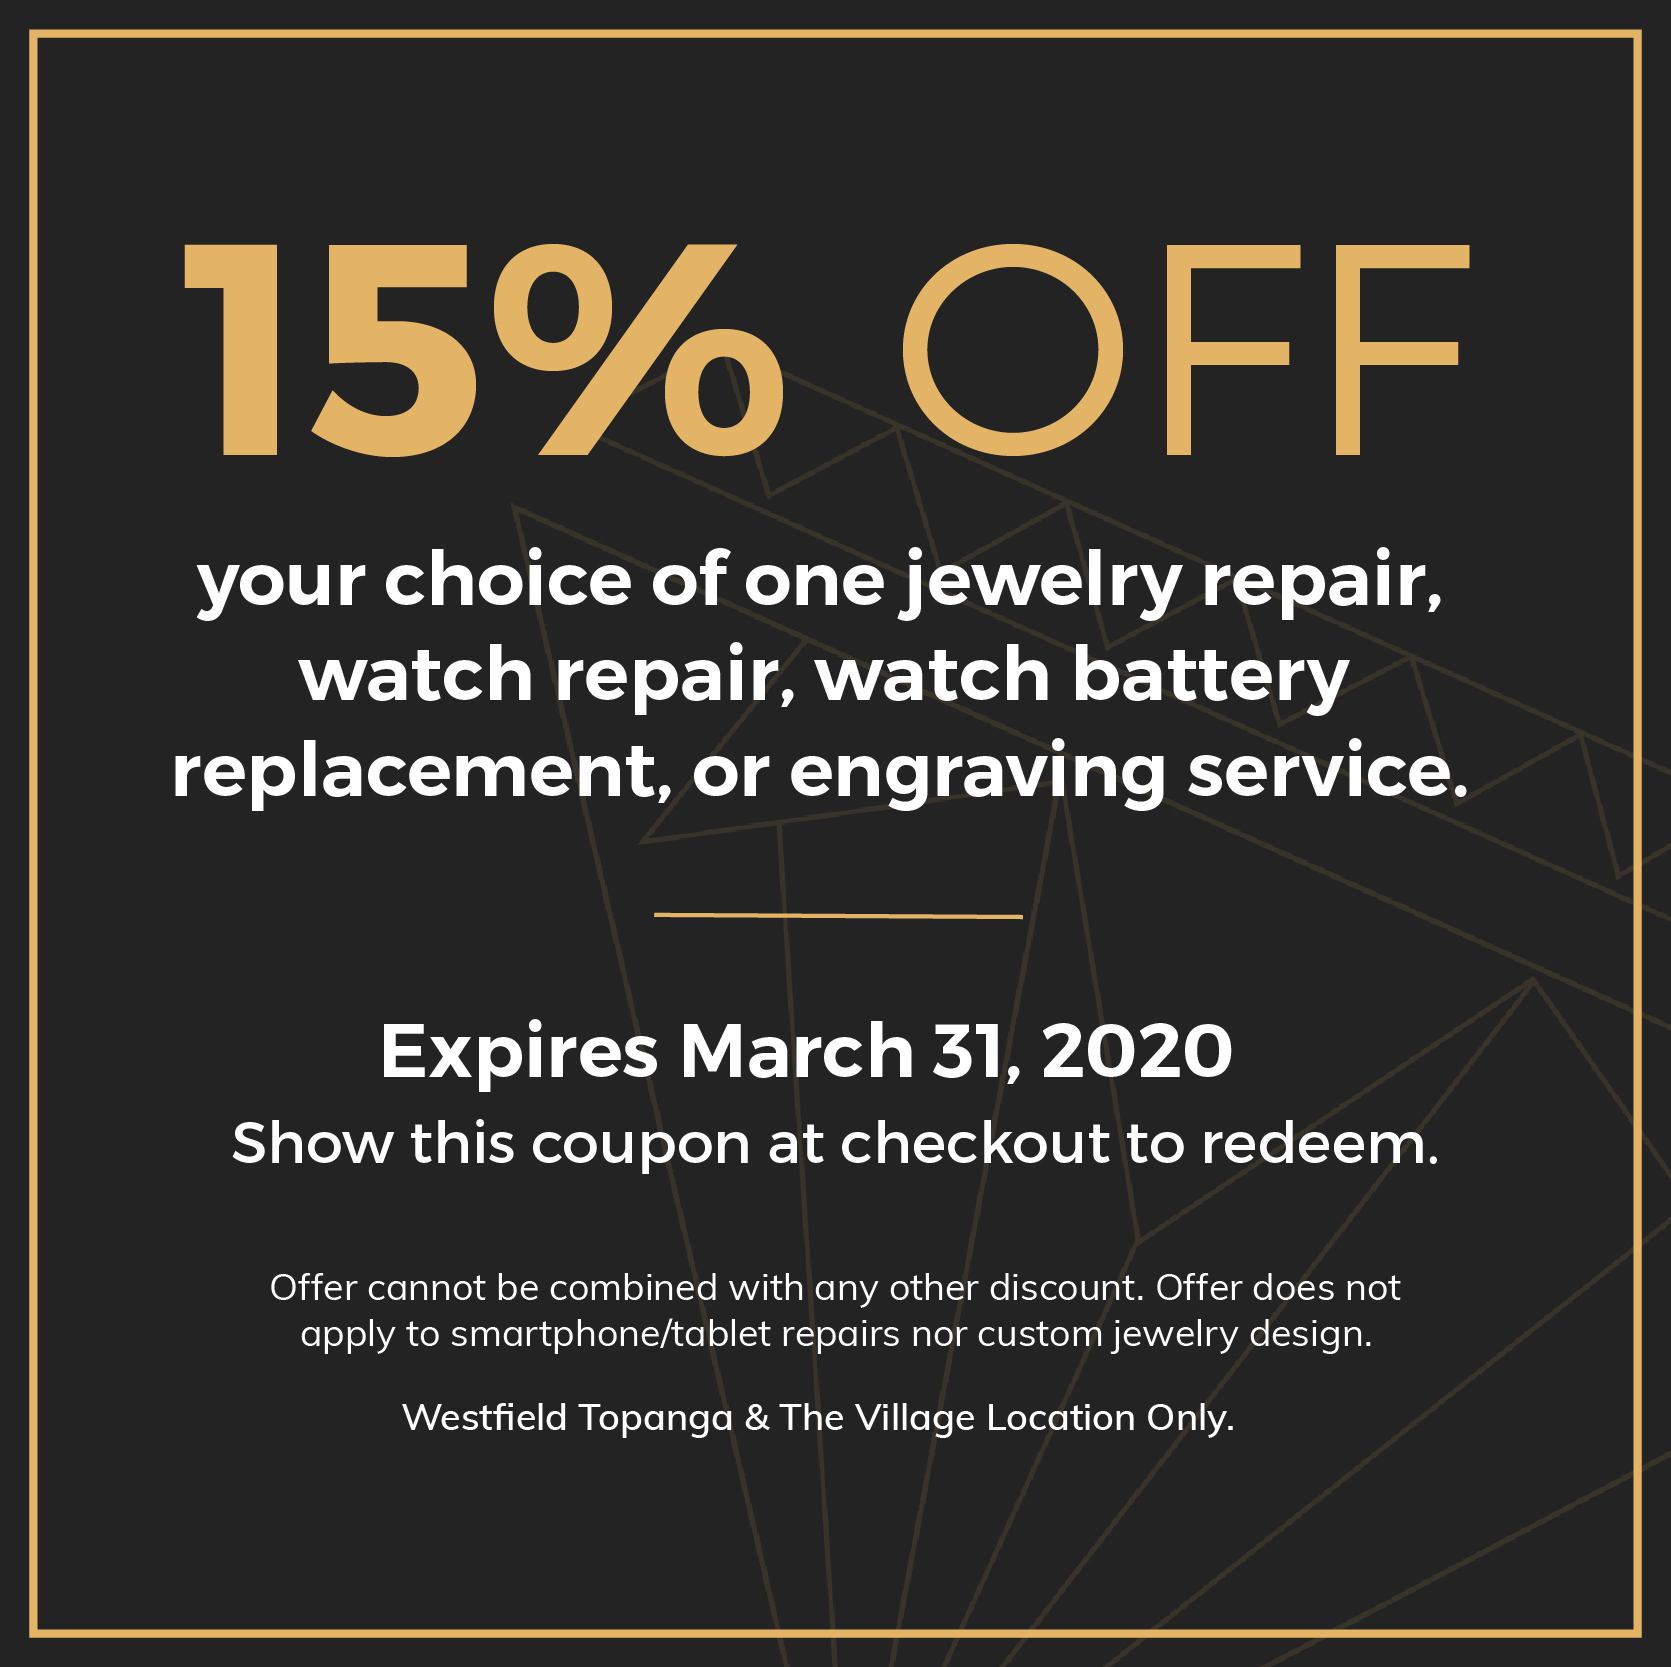 15% OFF. your choice of one jewelry repair, watch repair, watch battery replacement, or engraving service. Expires March 31, 2020. Show this coupon at checkout to redeem. Offer cannot be combined with any other discount. Offer does not apply to smartphone/tablet repairs nor custom jewelry design. Westfield Topanga & The Village Location Only.